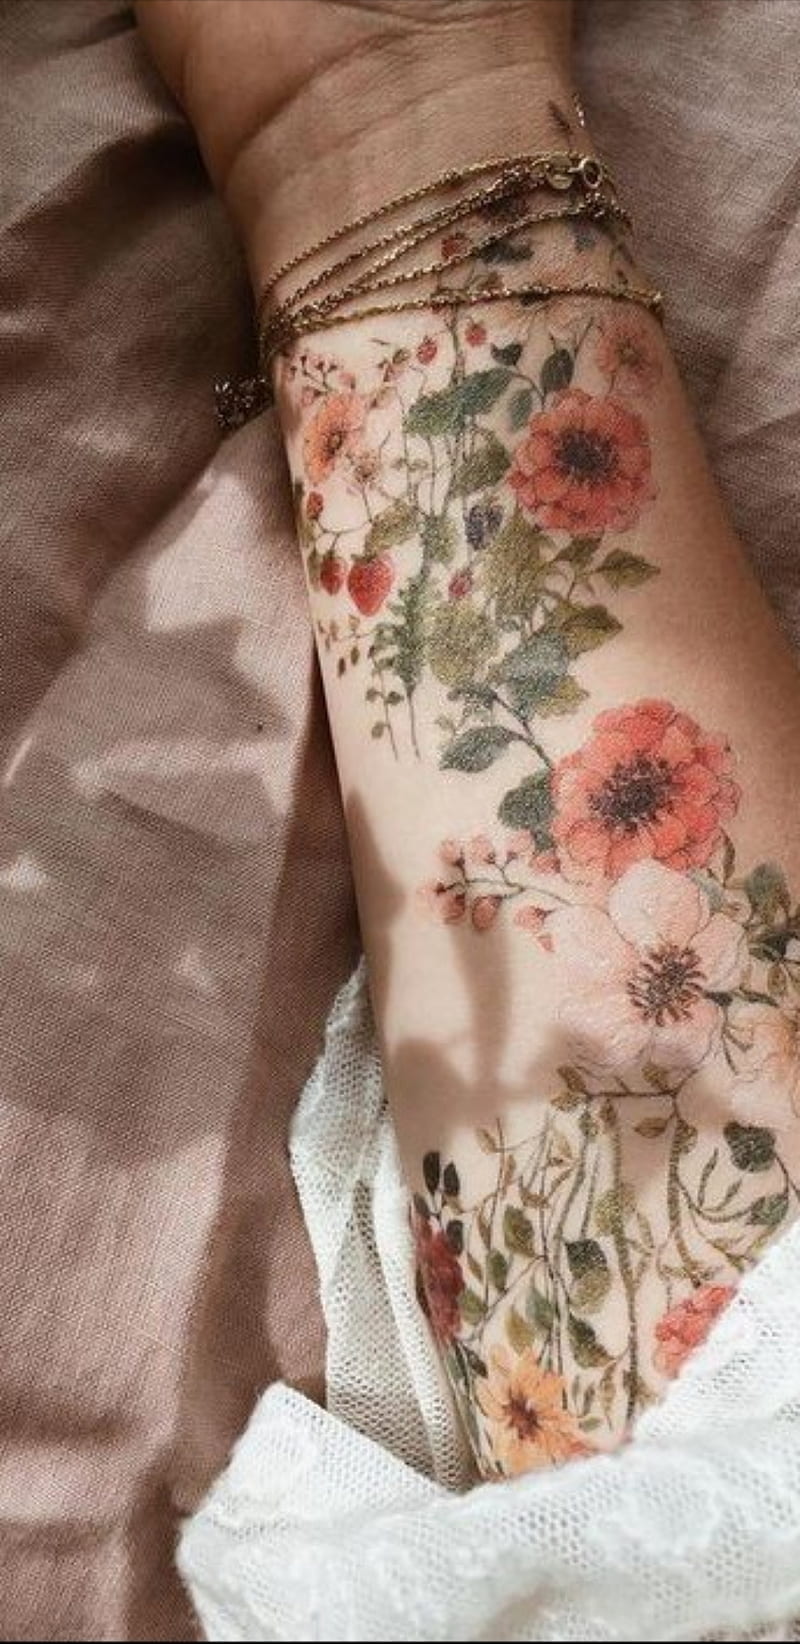 Aggregate more than 80 simple forearm flower tattoos best  thtantai2